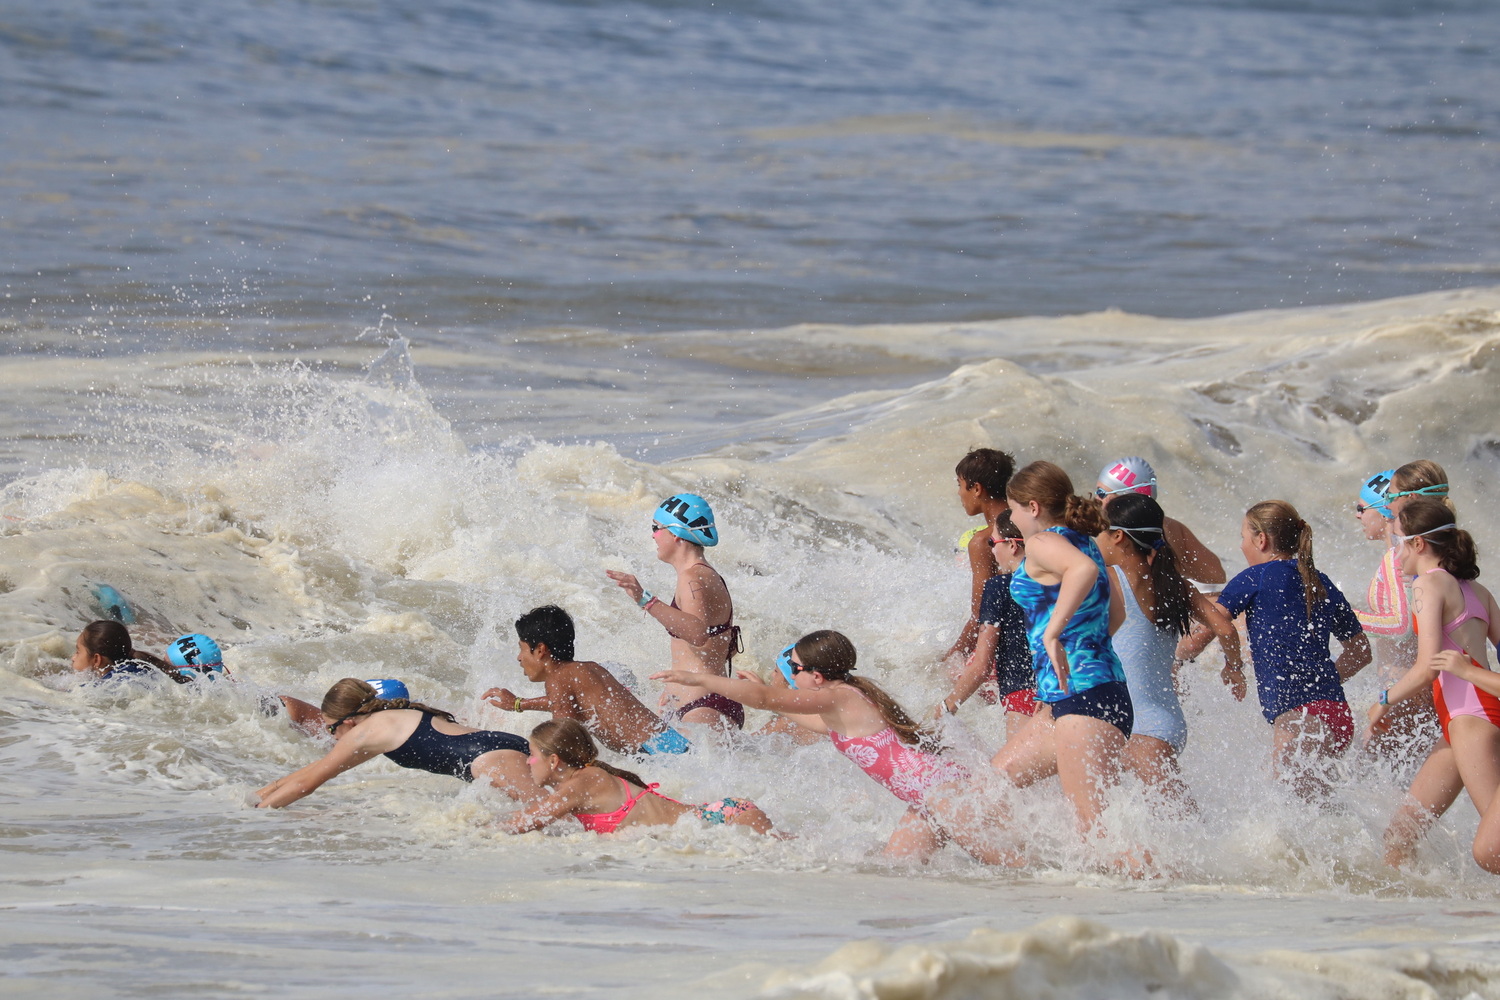 Junior lifeguards diving into the surf for the distance swim.  CINTIA PARSONS